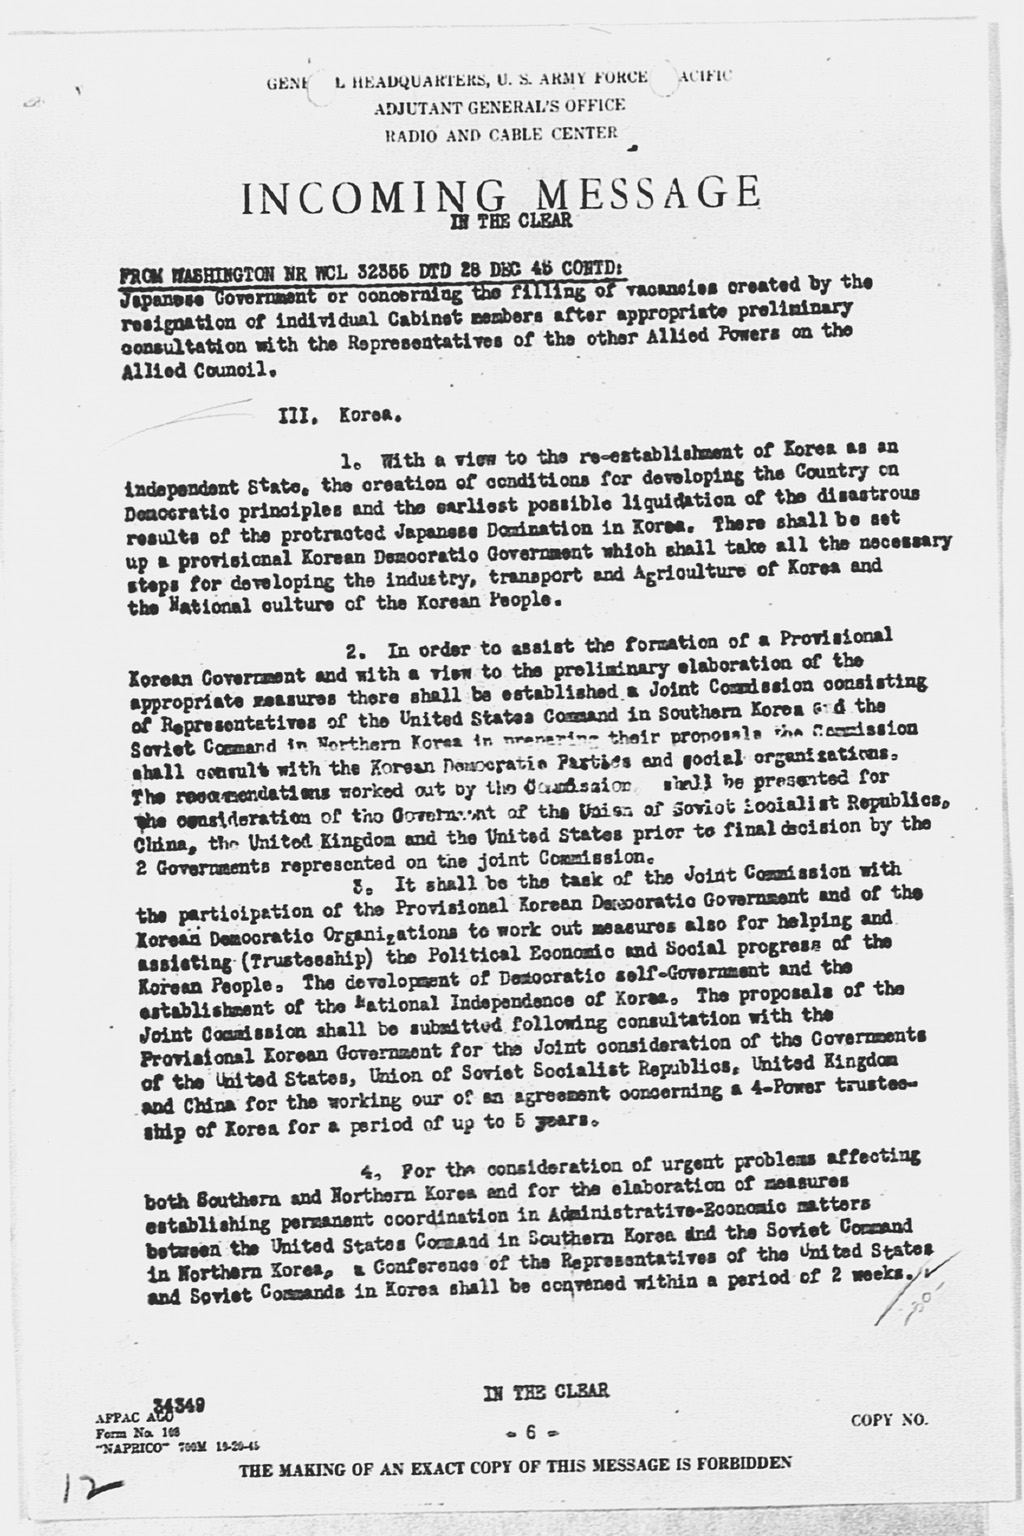 [Incoming Message to CINCAFPAC MacArthur from Washington (War), nr WCL 32355 Communique of Moscow Conference, December 27, 1945](Larger image)